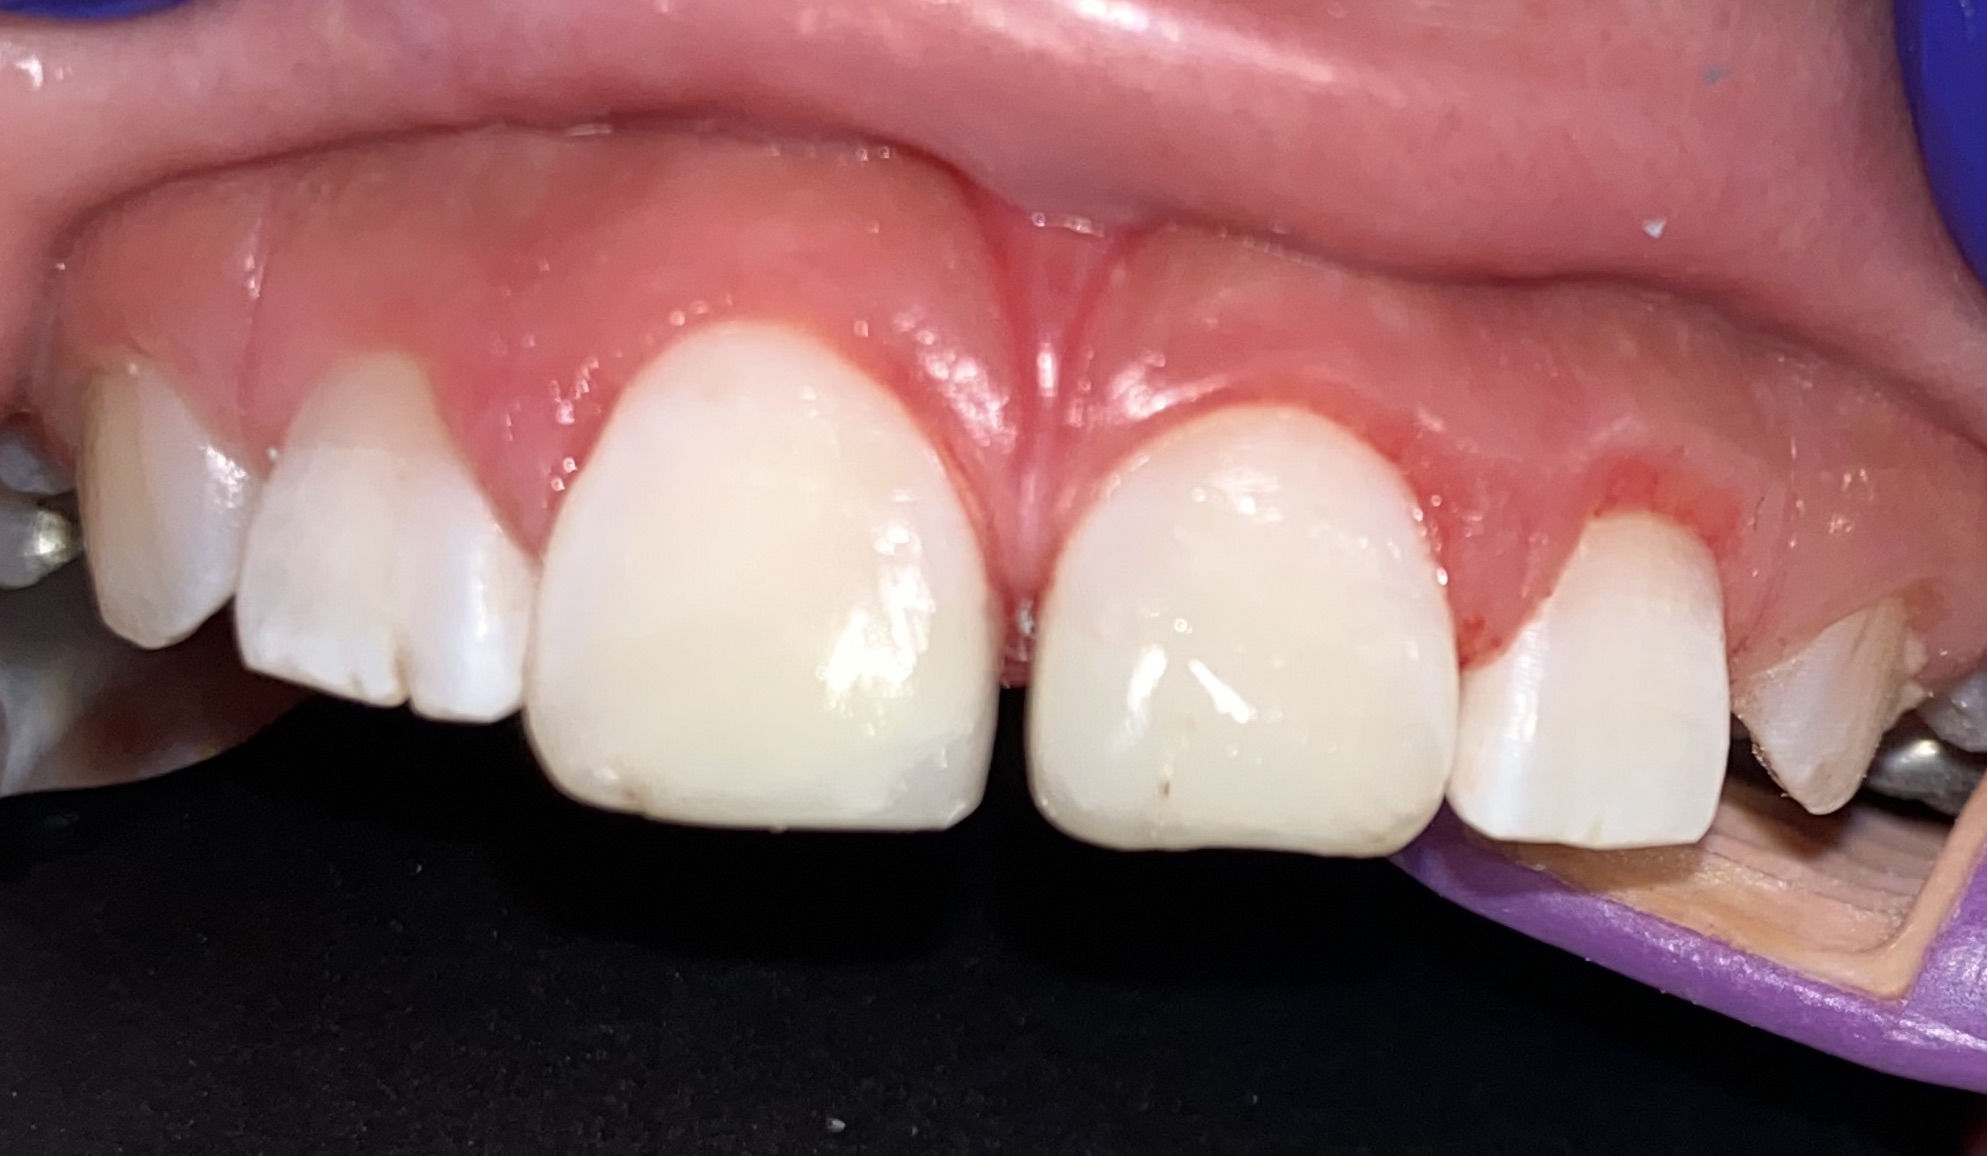 pediatric incisors after